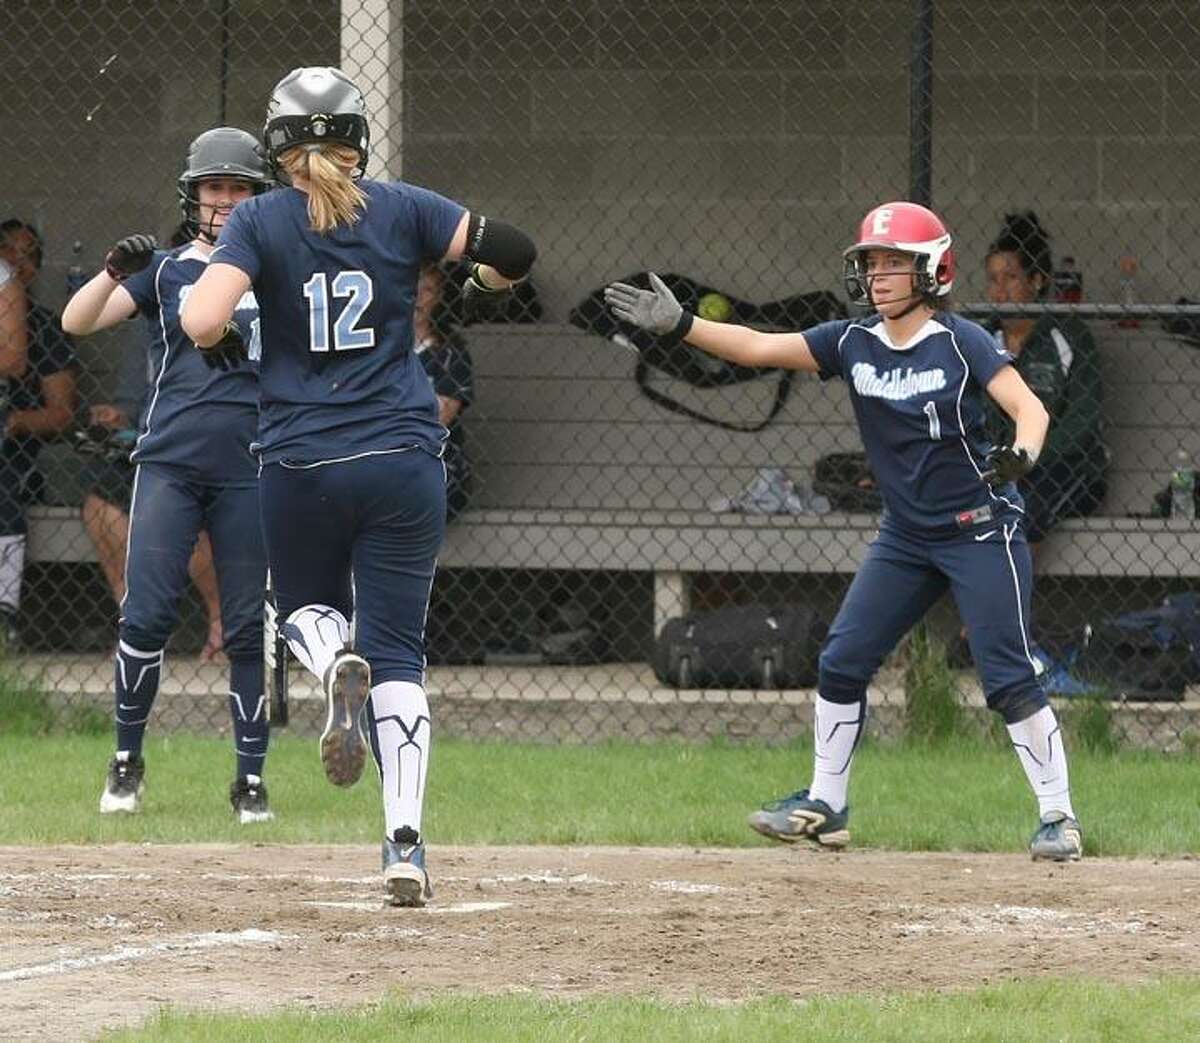 Todd Kalif/Special to The Press Middletown's Katherine Mosca and Cara Brainard welcome Ashley Tucker at the plate at the end of her home run in the second inning of Middletown's 3-0 softball win over Plainville on Wednesday.